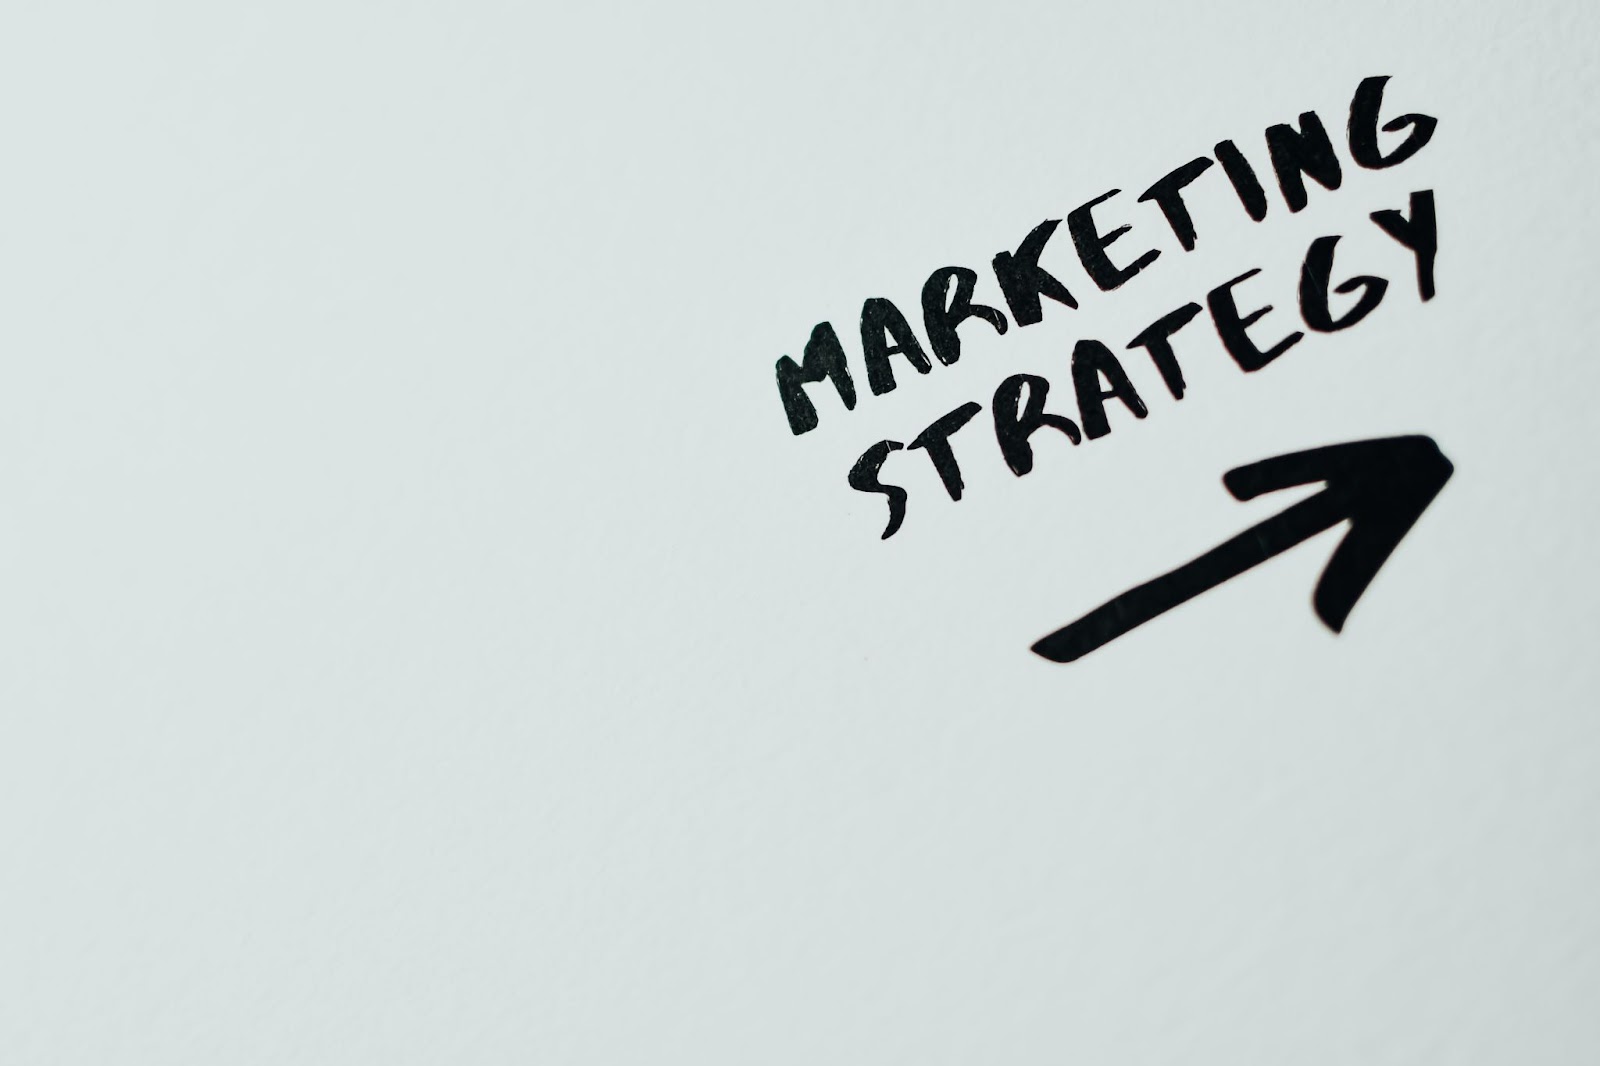 İmage of the text MARKETING STRATEGY with an arrow under it